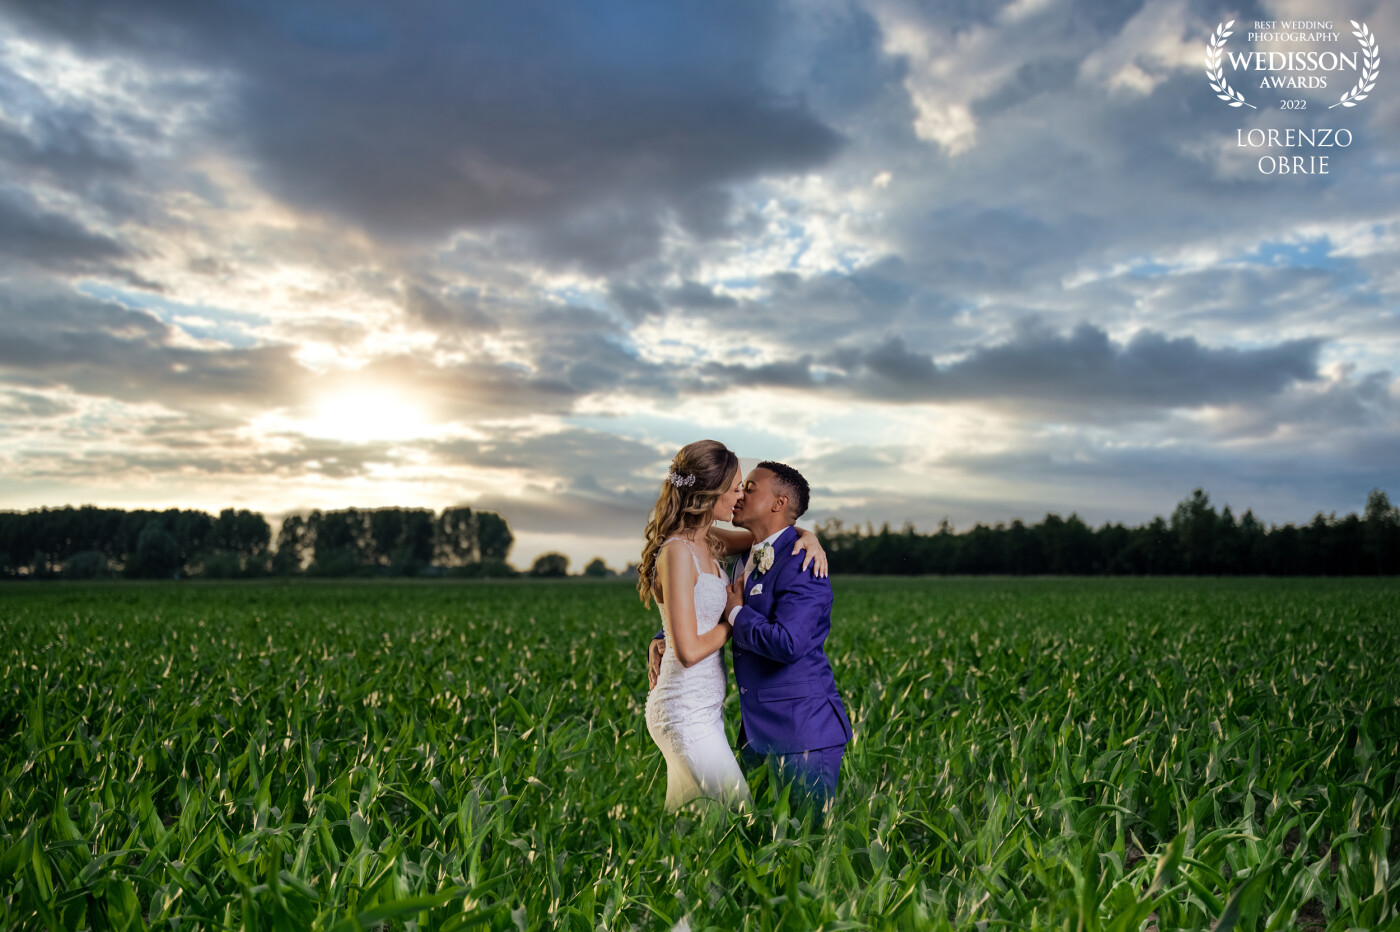 This picture was taken during a beautiful sunset in a cornfield in the southern parts of the Netherlands just before the wedding was over.